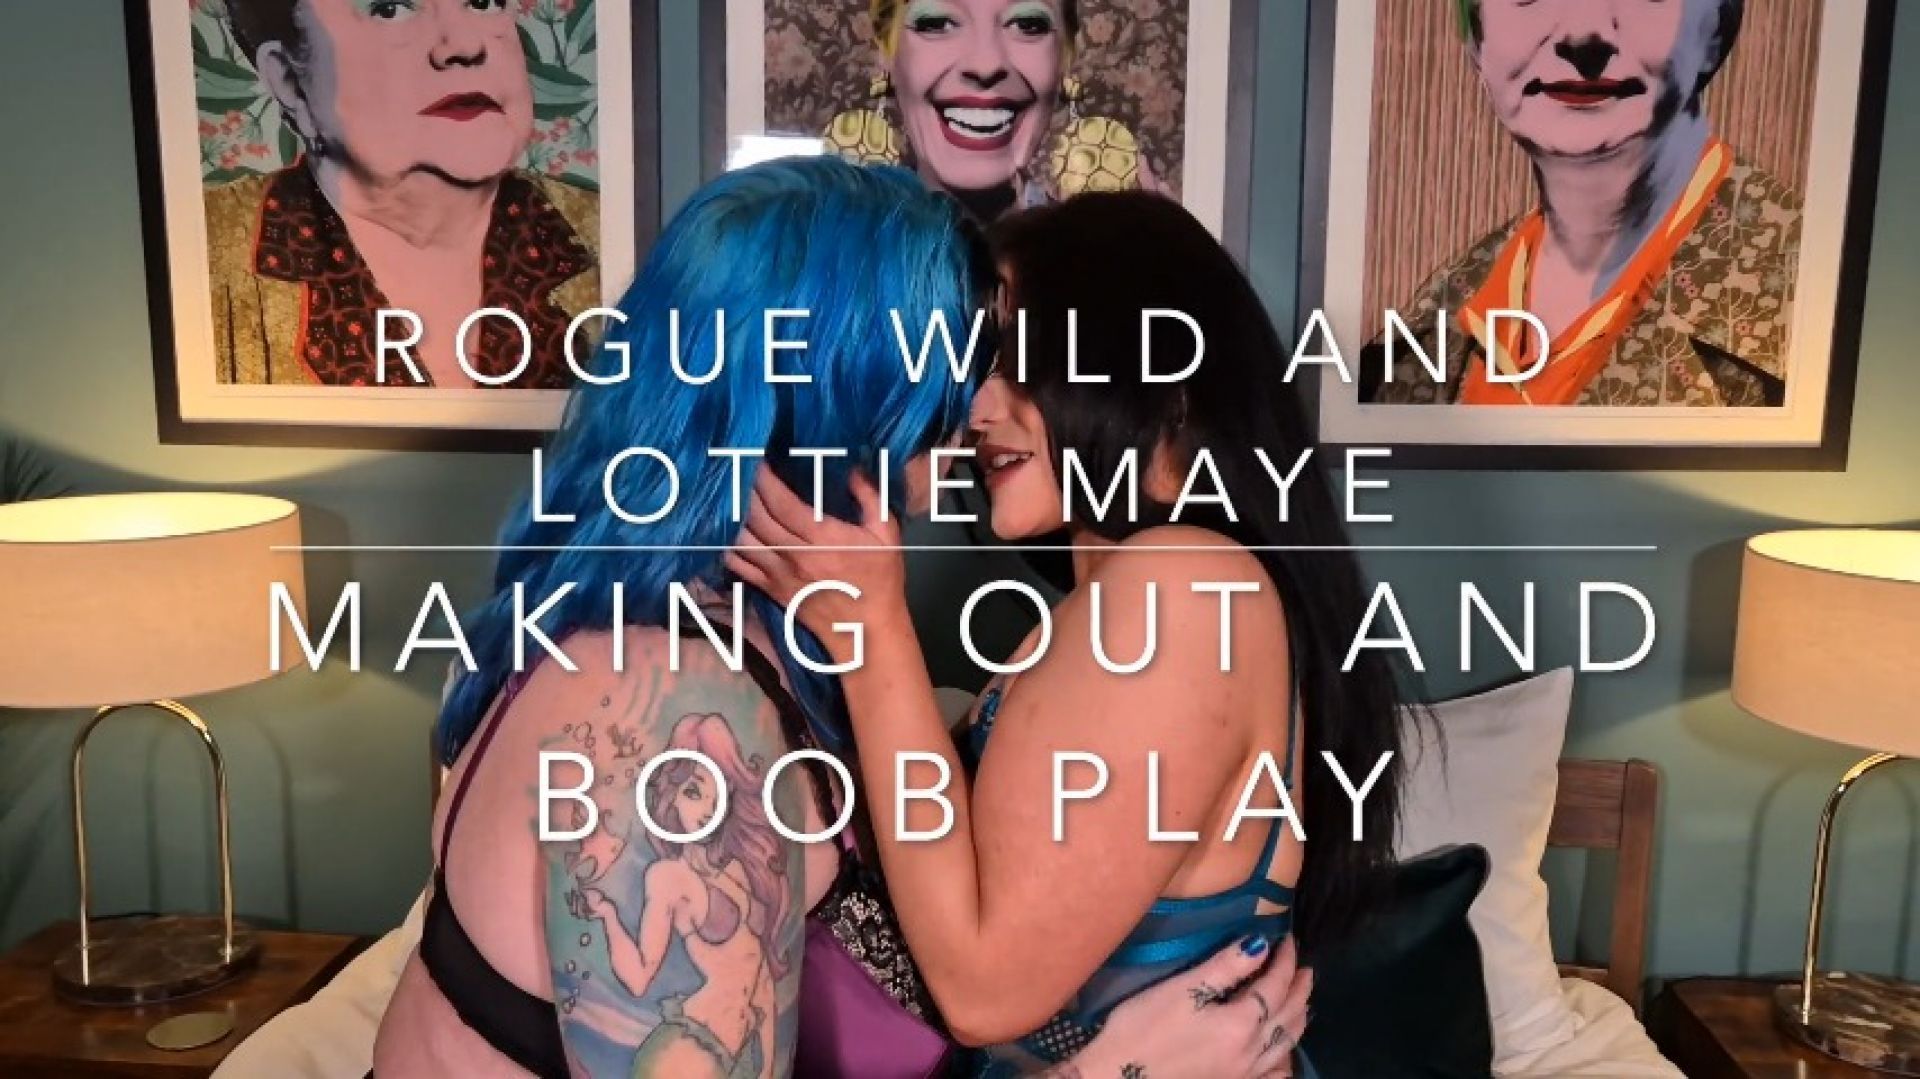 Rogue Wild and Lottie Maye making out and boob play